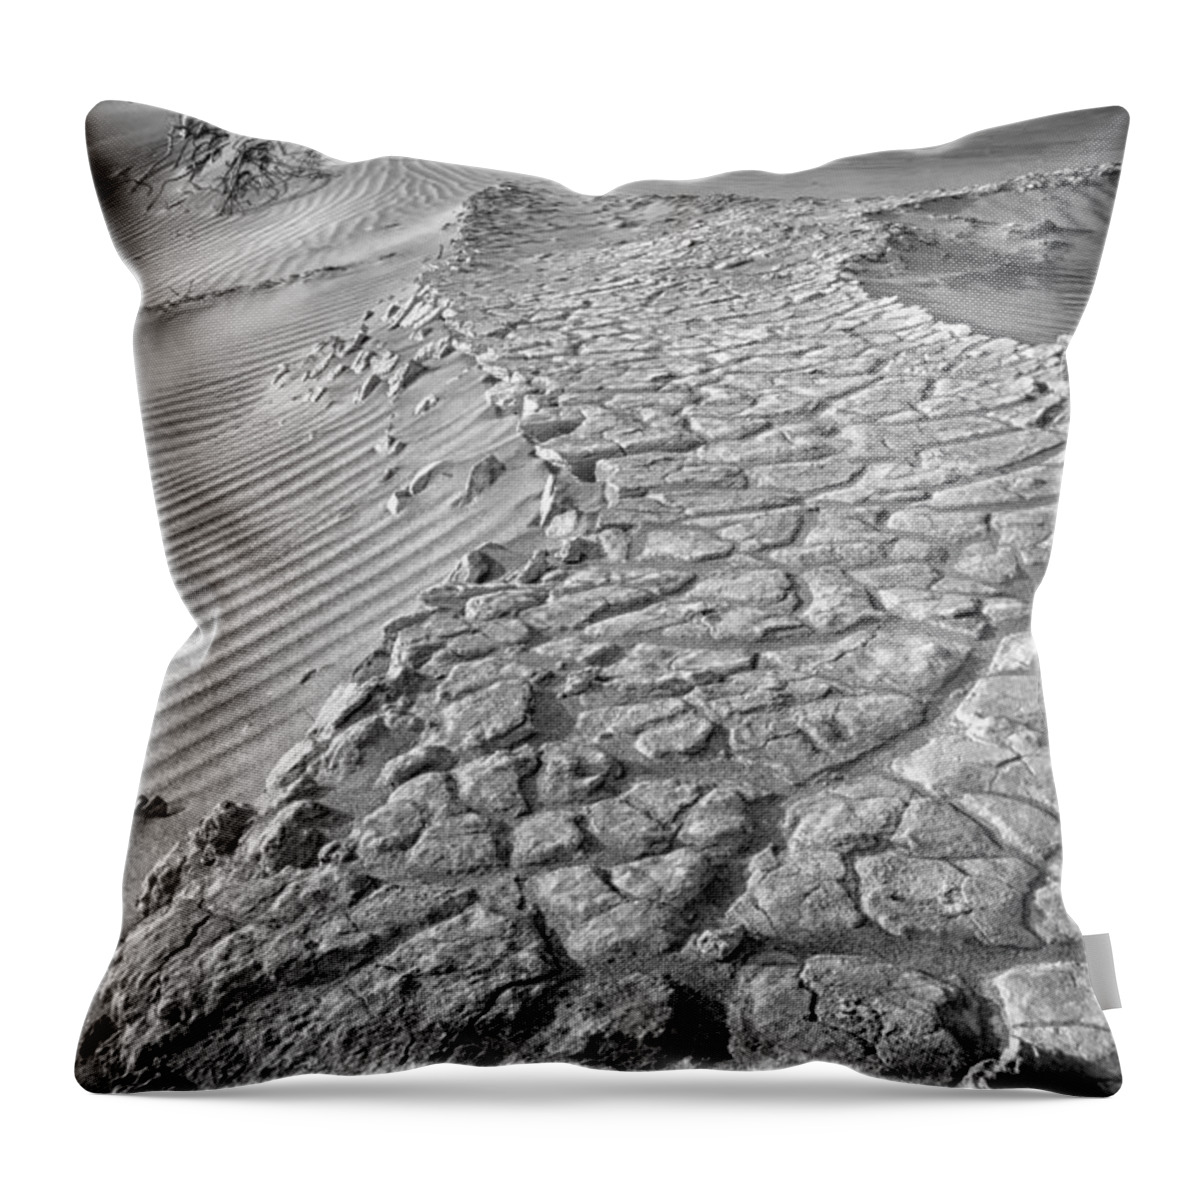 Crystal Yingling Throw Pillow featuring the photograph Pathway by Ghostwinds Photography